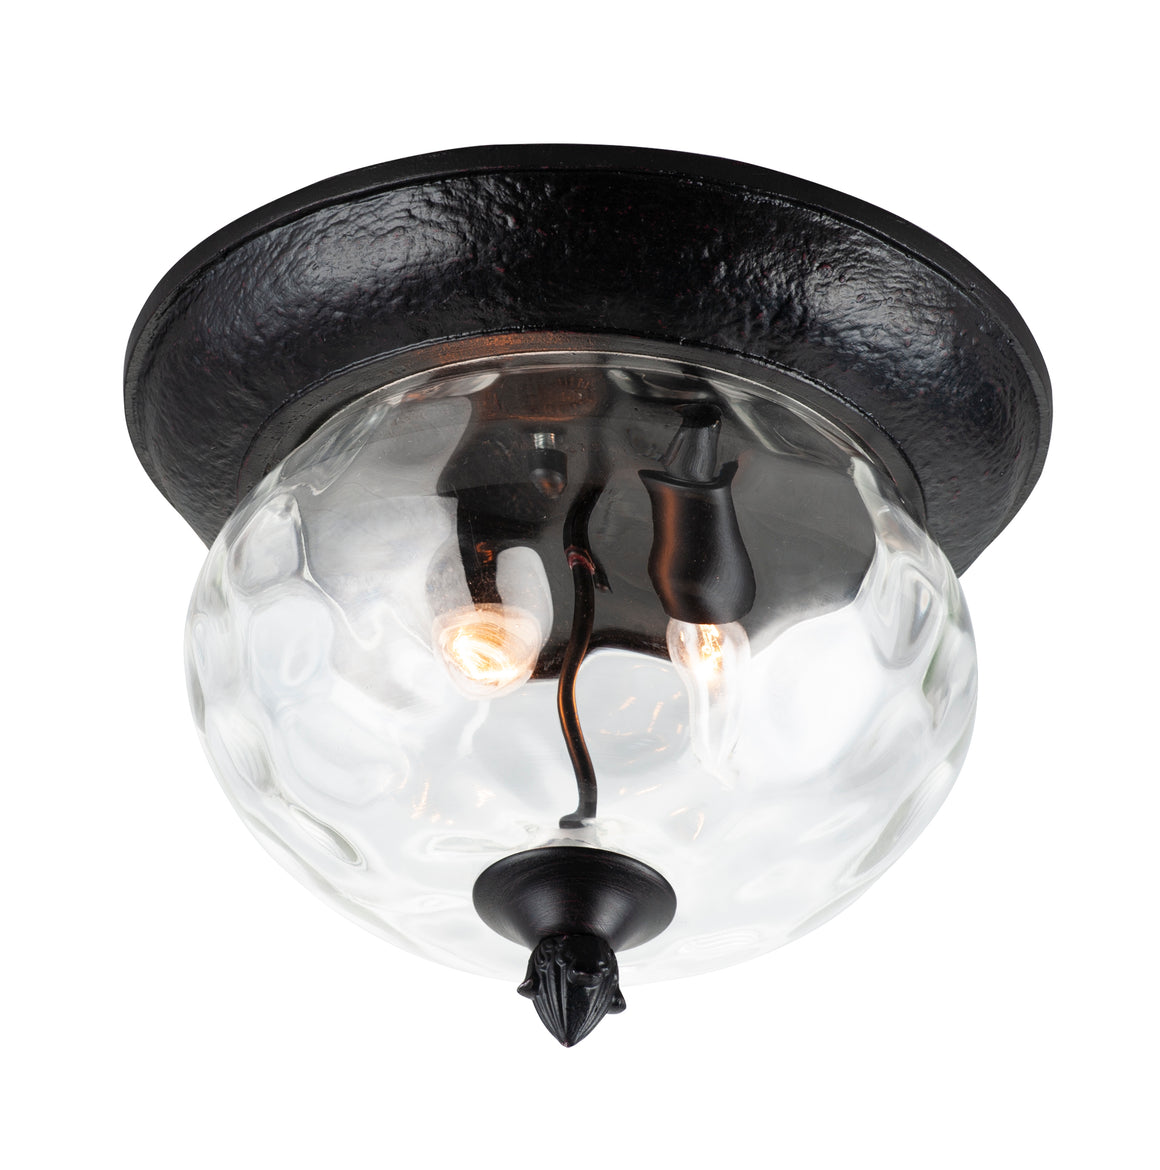 Carriage House DC 2-Light Outdoor Ceiling Mount